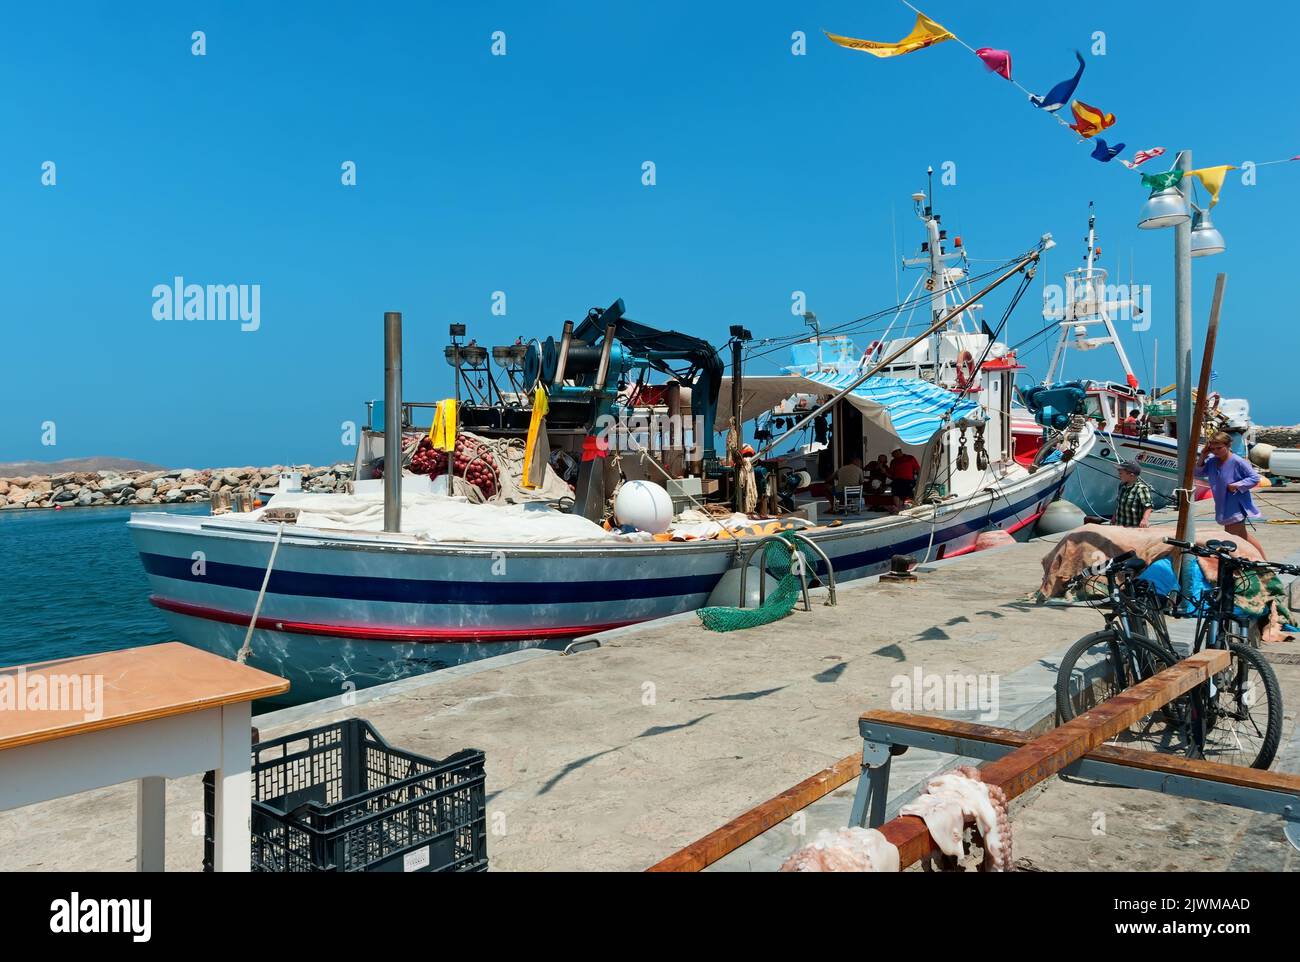 Shipping boats in the port of Naoussa, Paros island, Greece Stock Photo